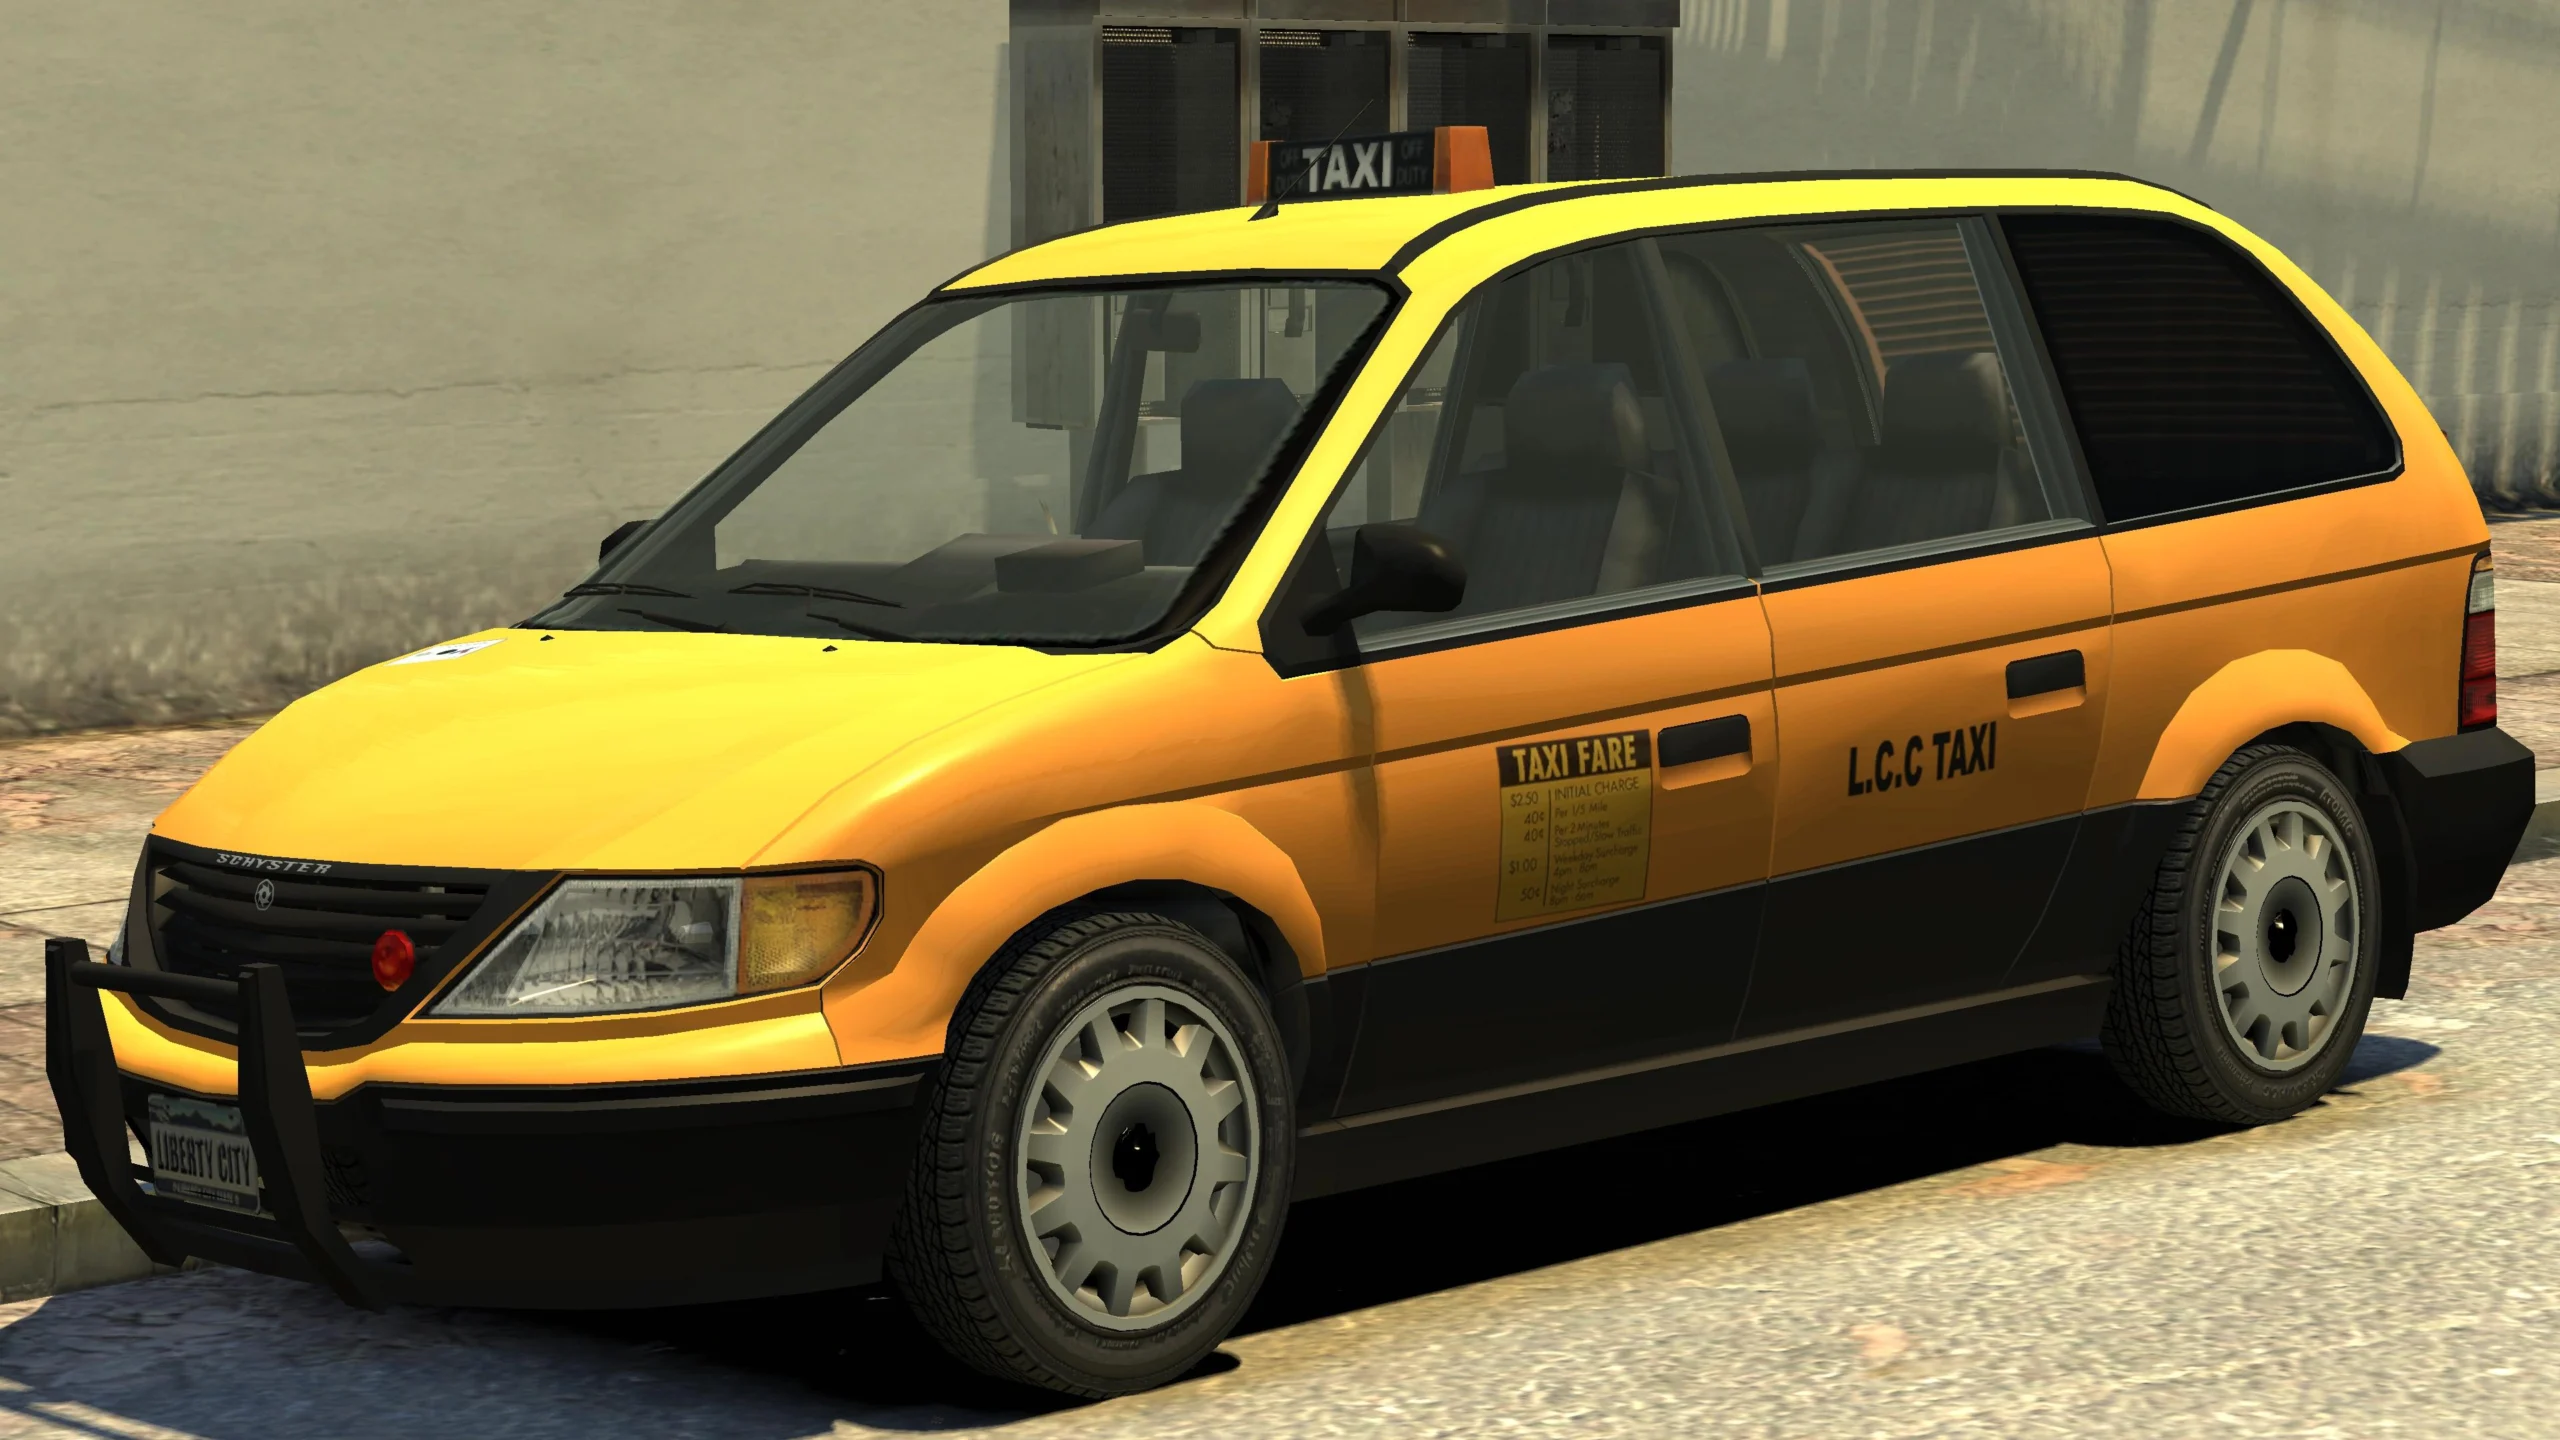 gta iv taxi number - How do you ask for a taxi in GTA 4